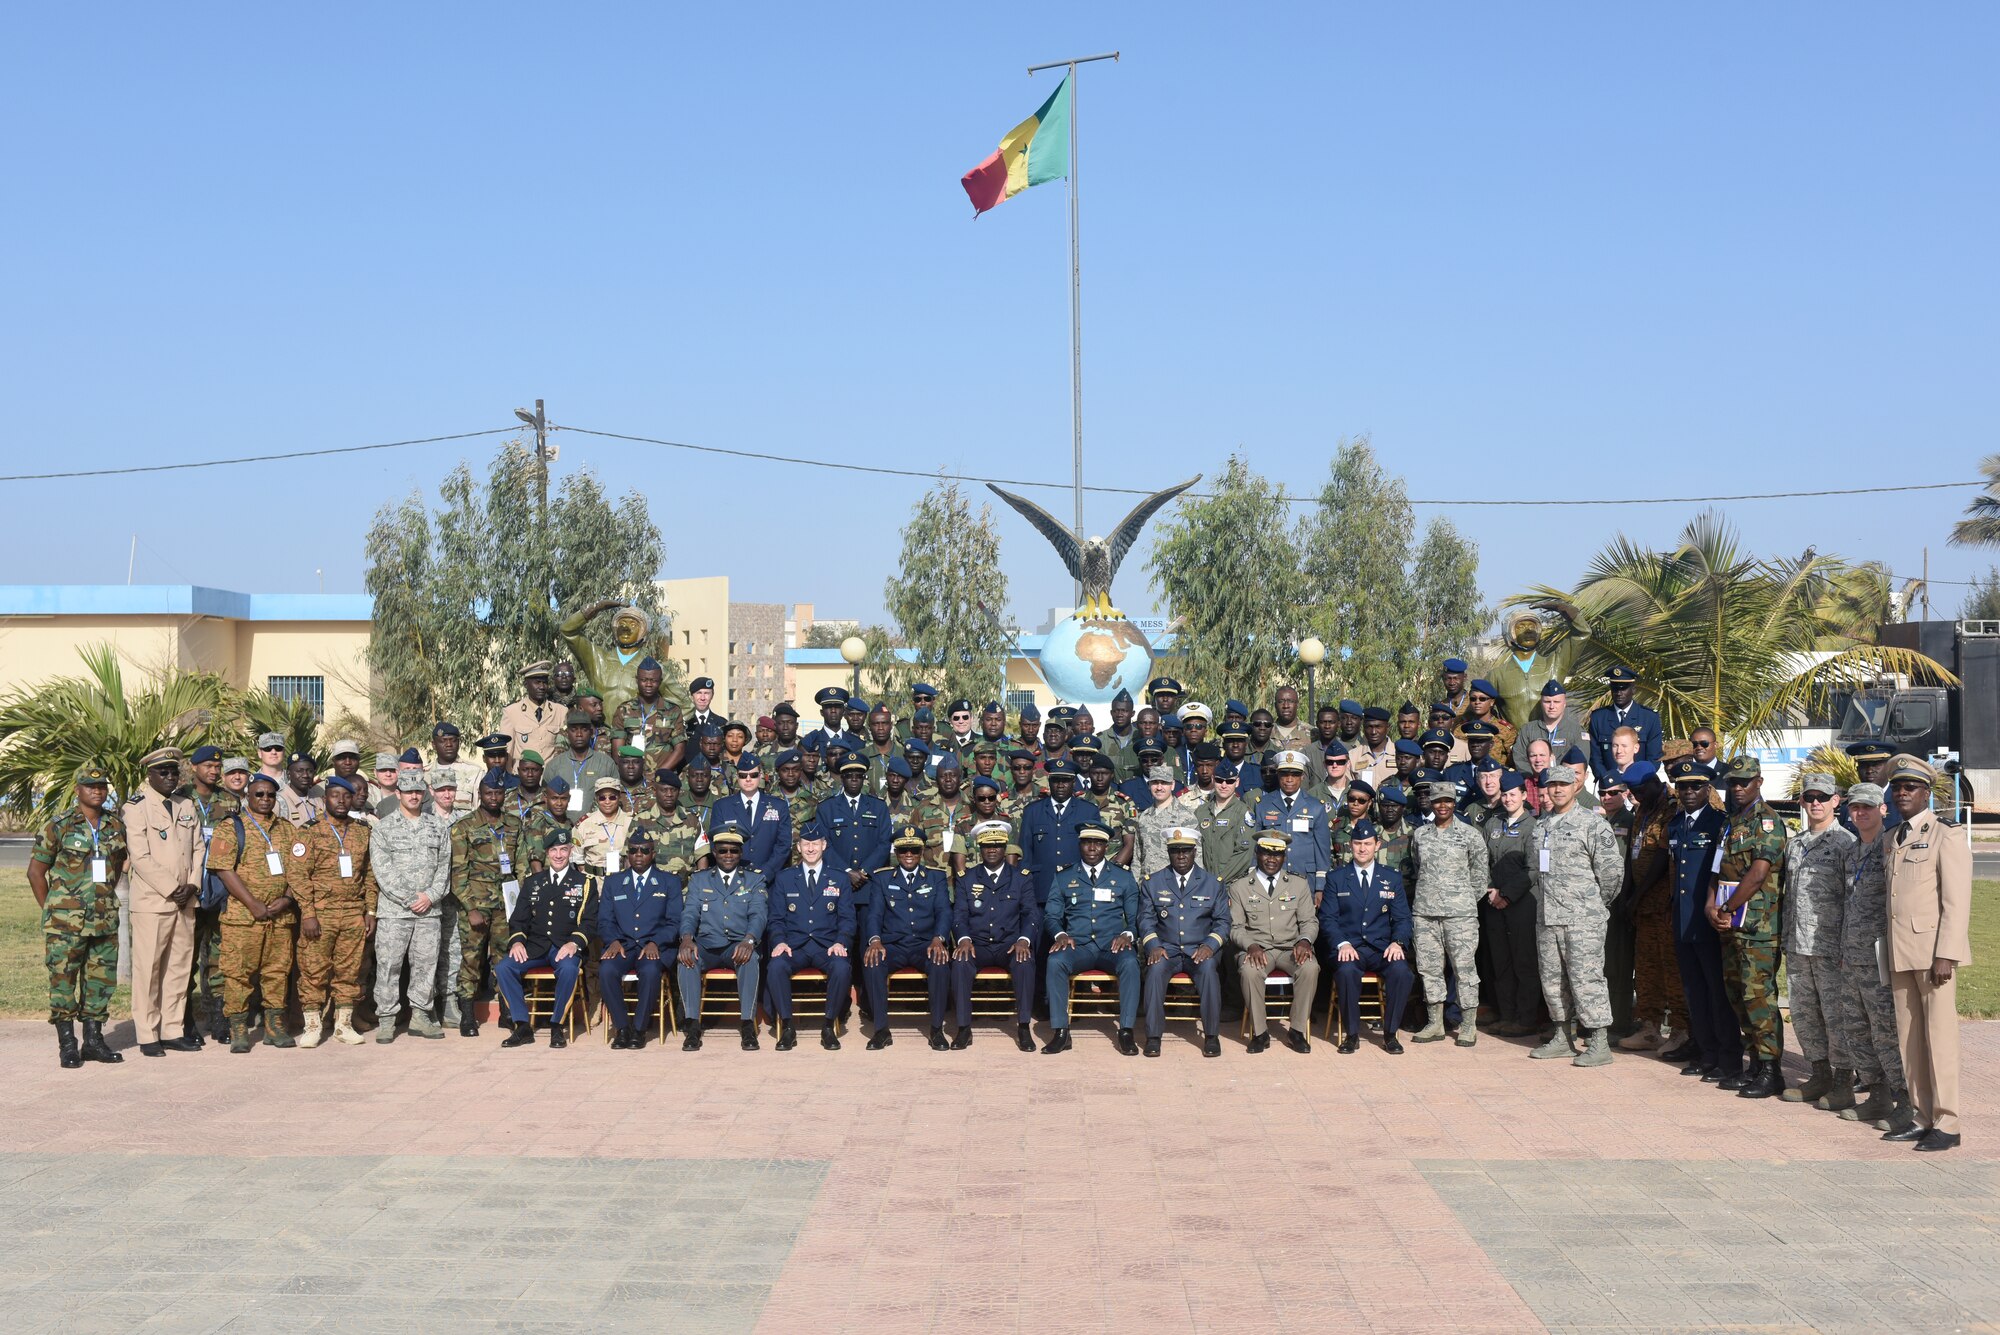 Participants of African Partnership Flight Senegal pose for a photo after the opening ceremony of APF at Captain Andalla Cissé Air Base, Senegal, March 19, 2018. Ten nations are participating in this event, which will focus on casualty evacuation, aeromedical evacuation, as well as air and ground safety. (U.S. Air Force photo by Airman 1st Class Eli Chevalier)